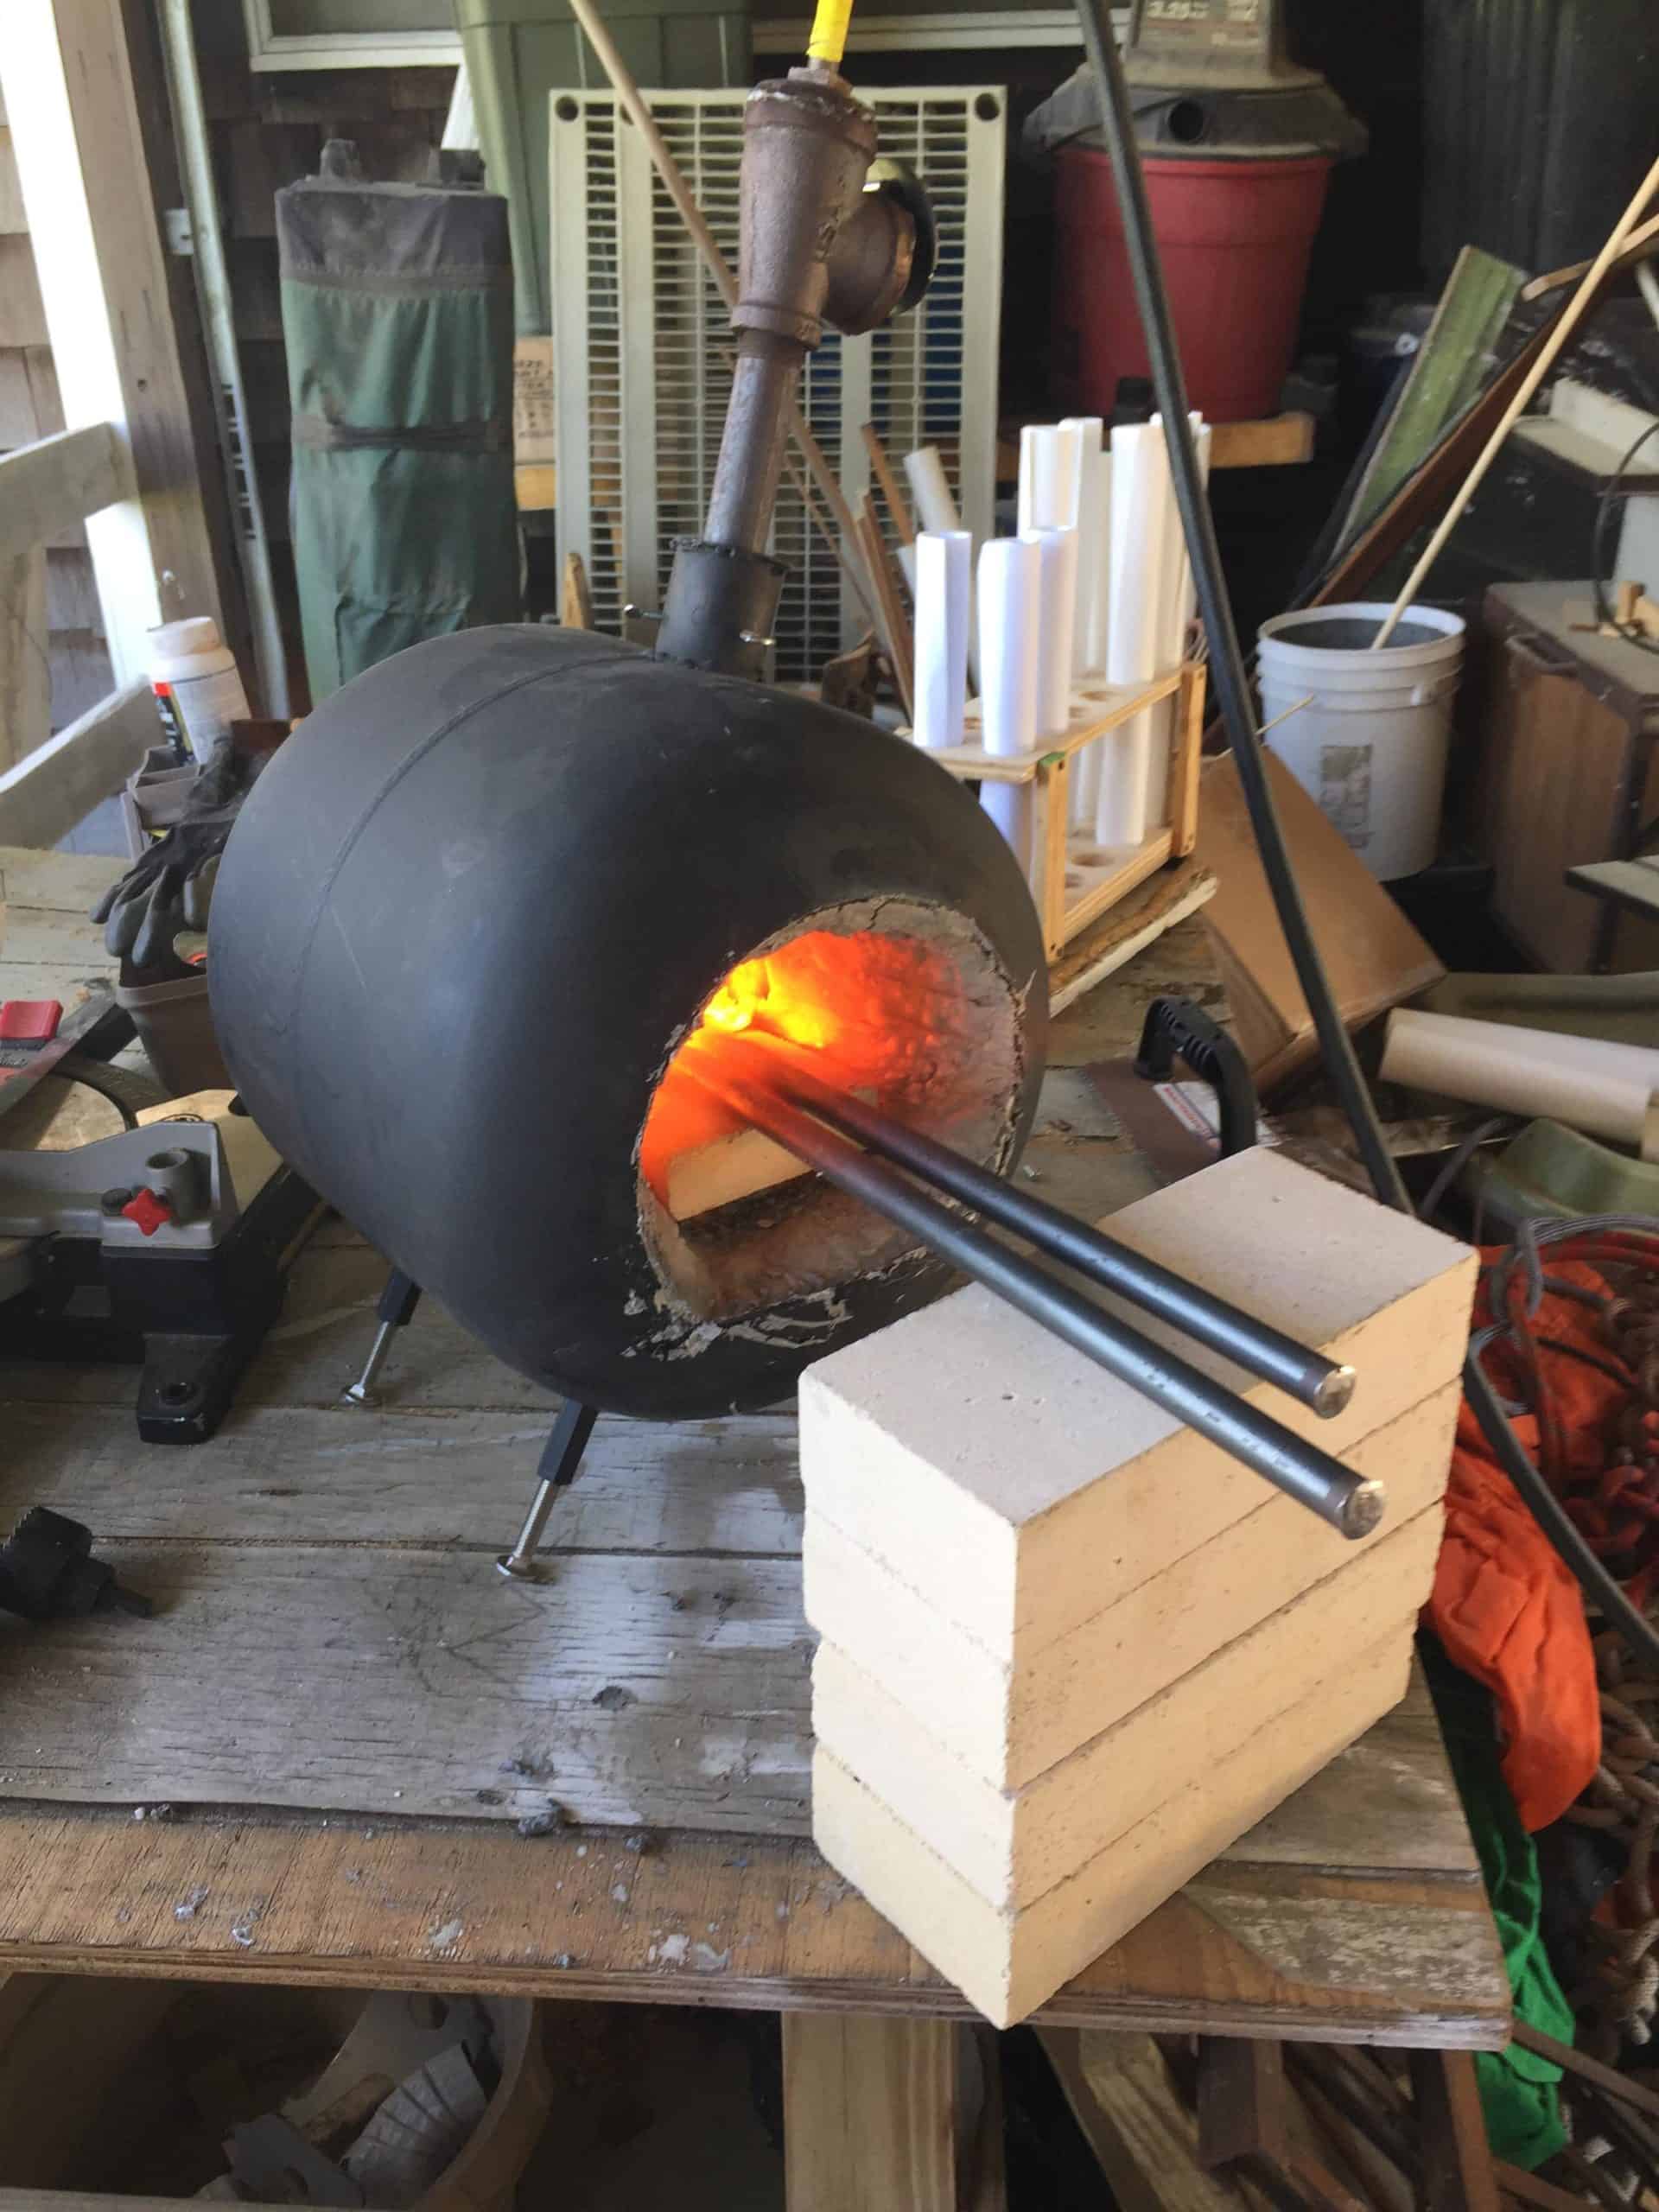 Propane forge burner. Buy or build your own? - Beginners Place -  Bladesmith's Forum Board